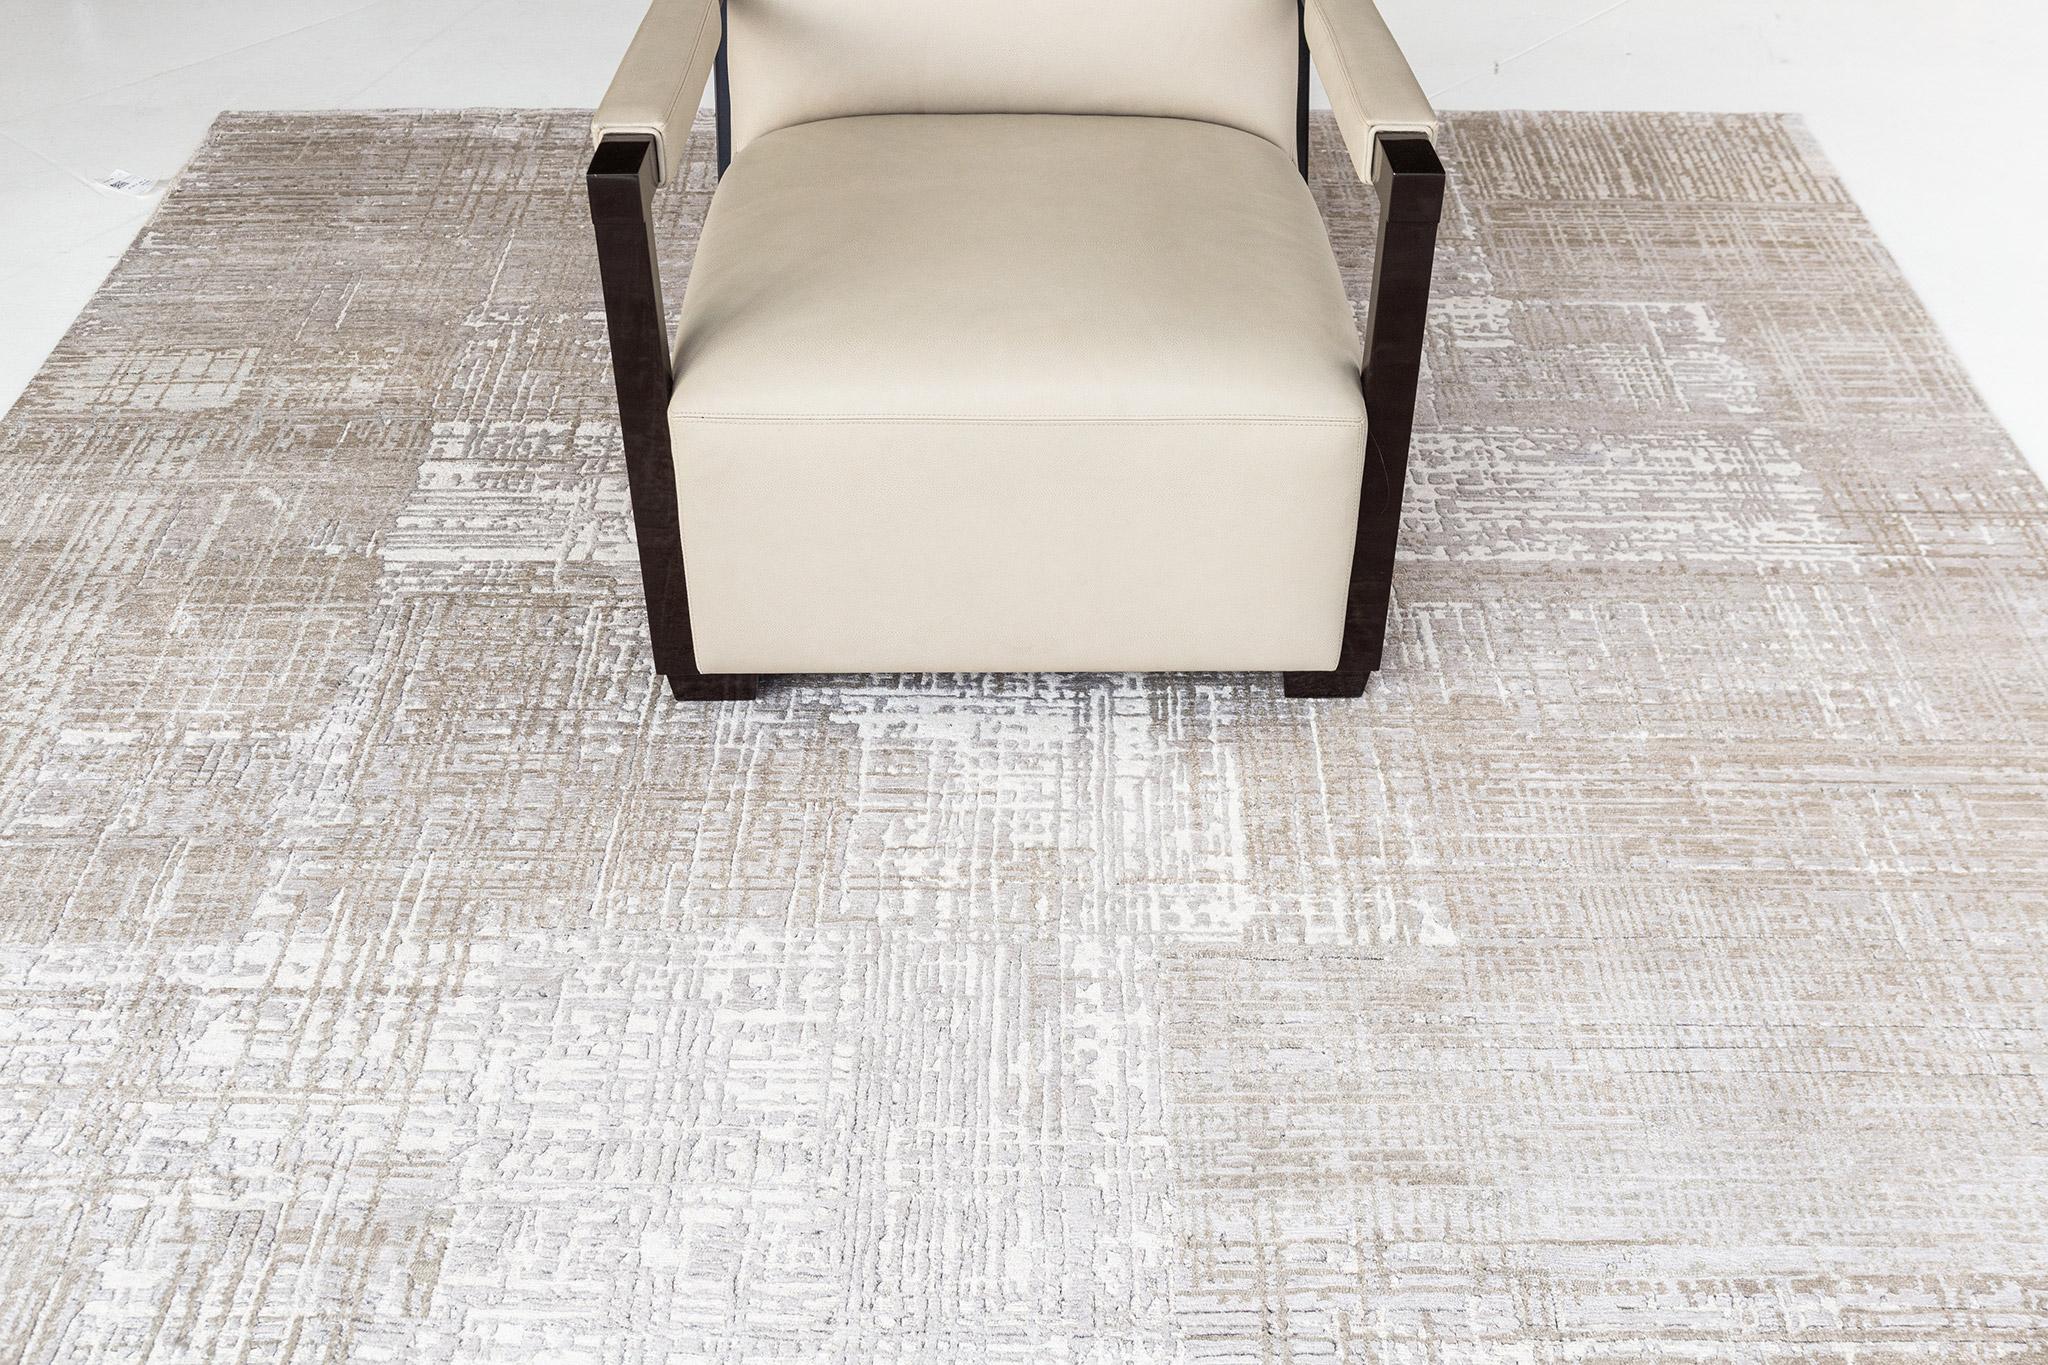 Casri is a bamboo silk rug with horizontal and vertical strokes in deep gradations of charcoal, ivory, and cream. Its handwoven wool features a series of free-spirited rugs that feels innately soft underfoot and is enhanced by extraordinary, valiant